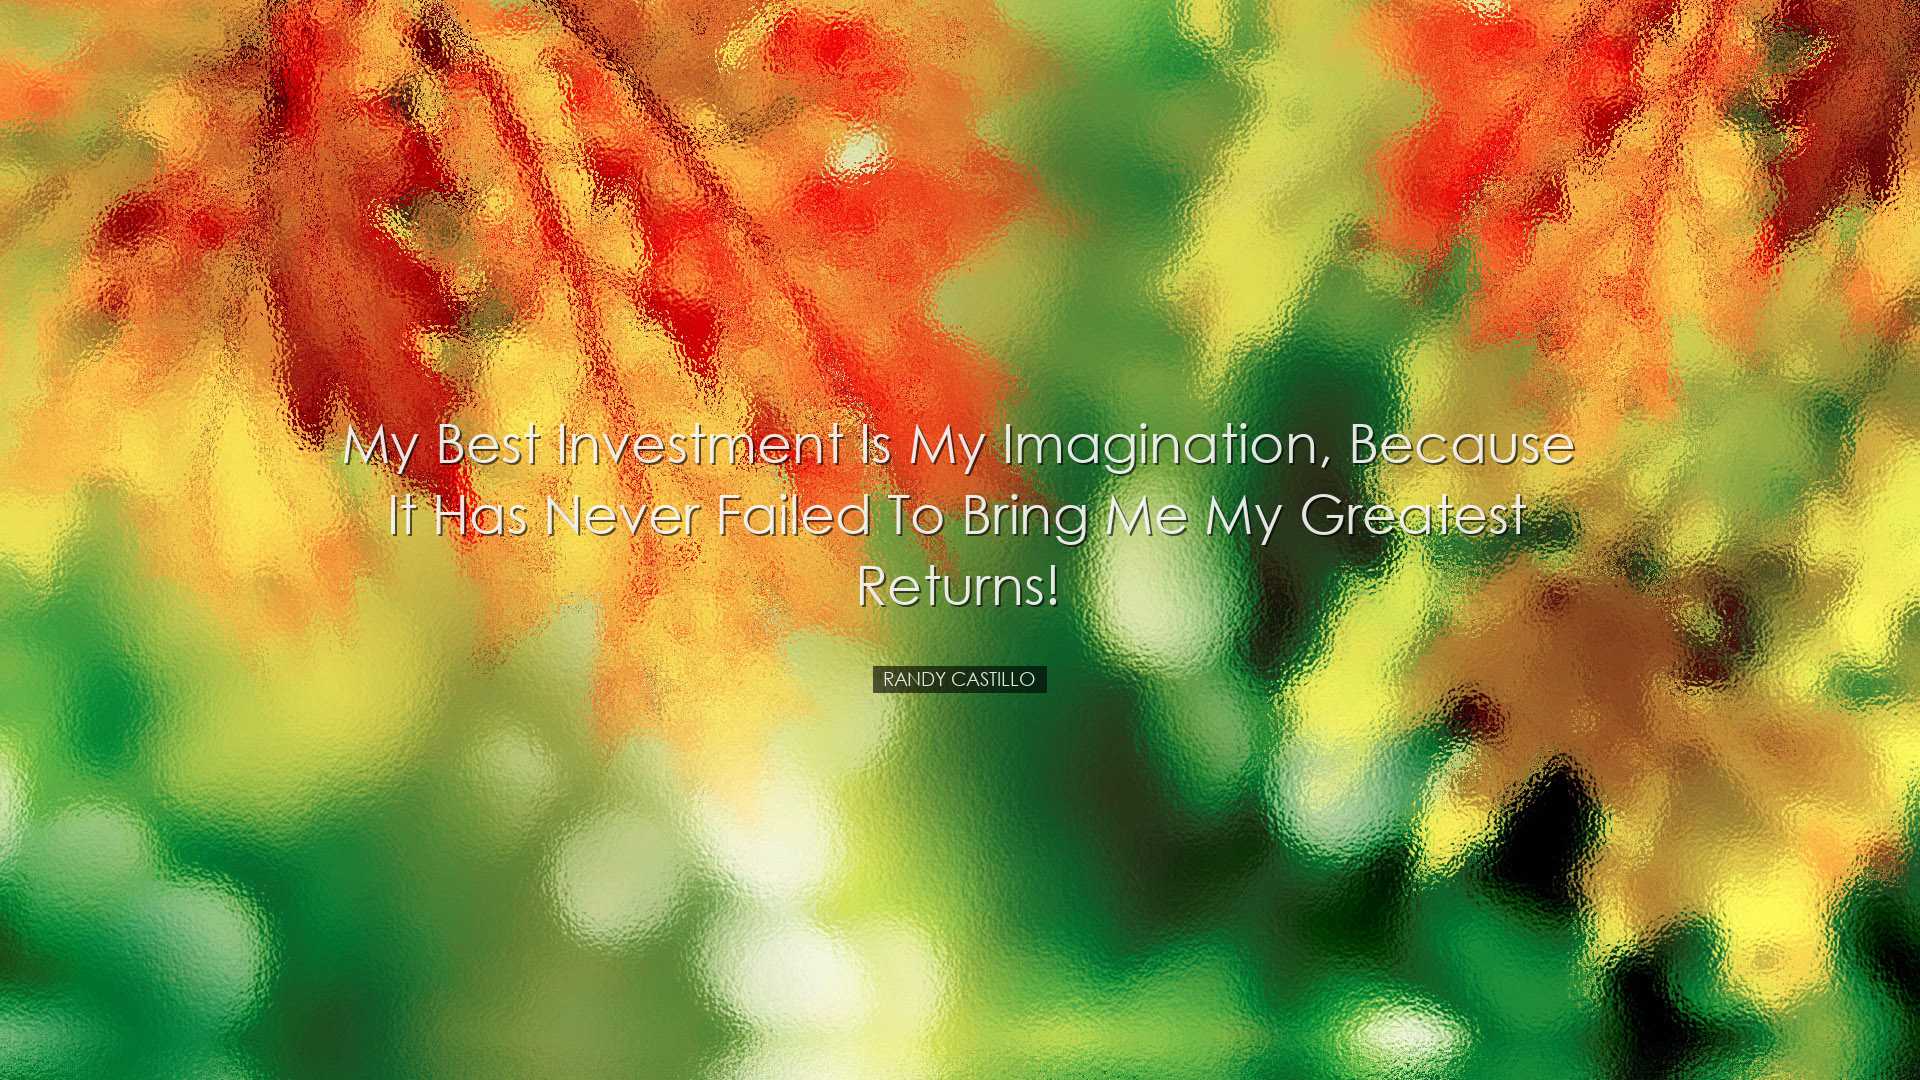 My best investment is my imagination, because it has never failed